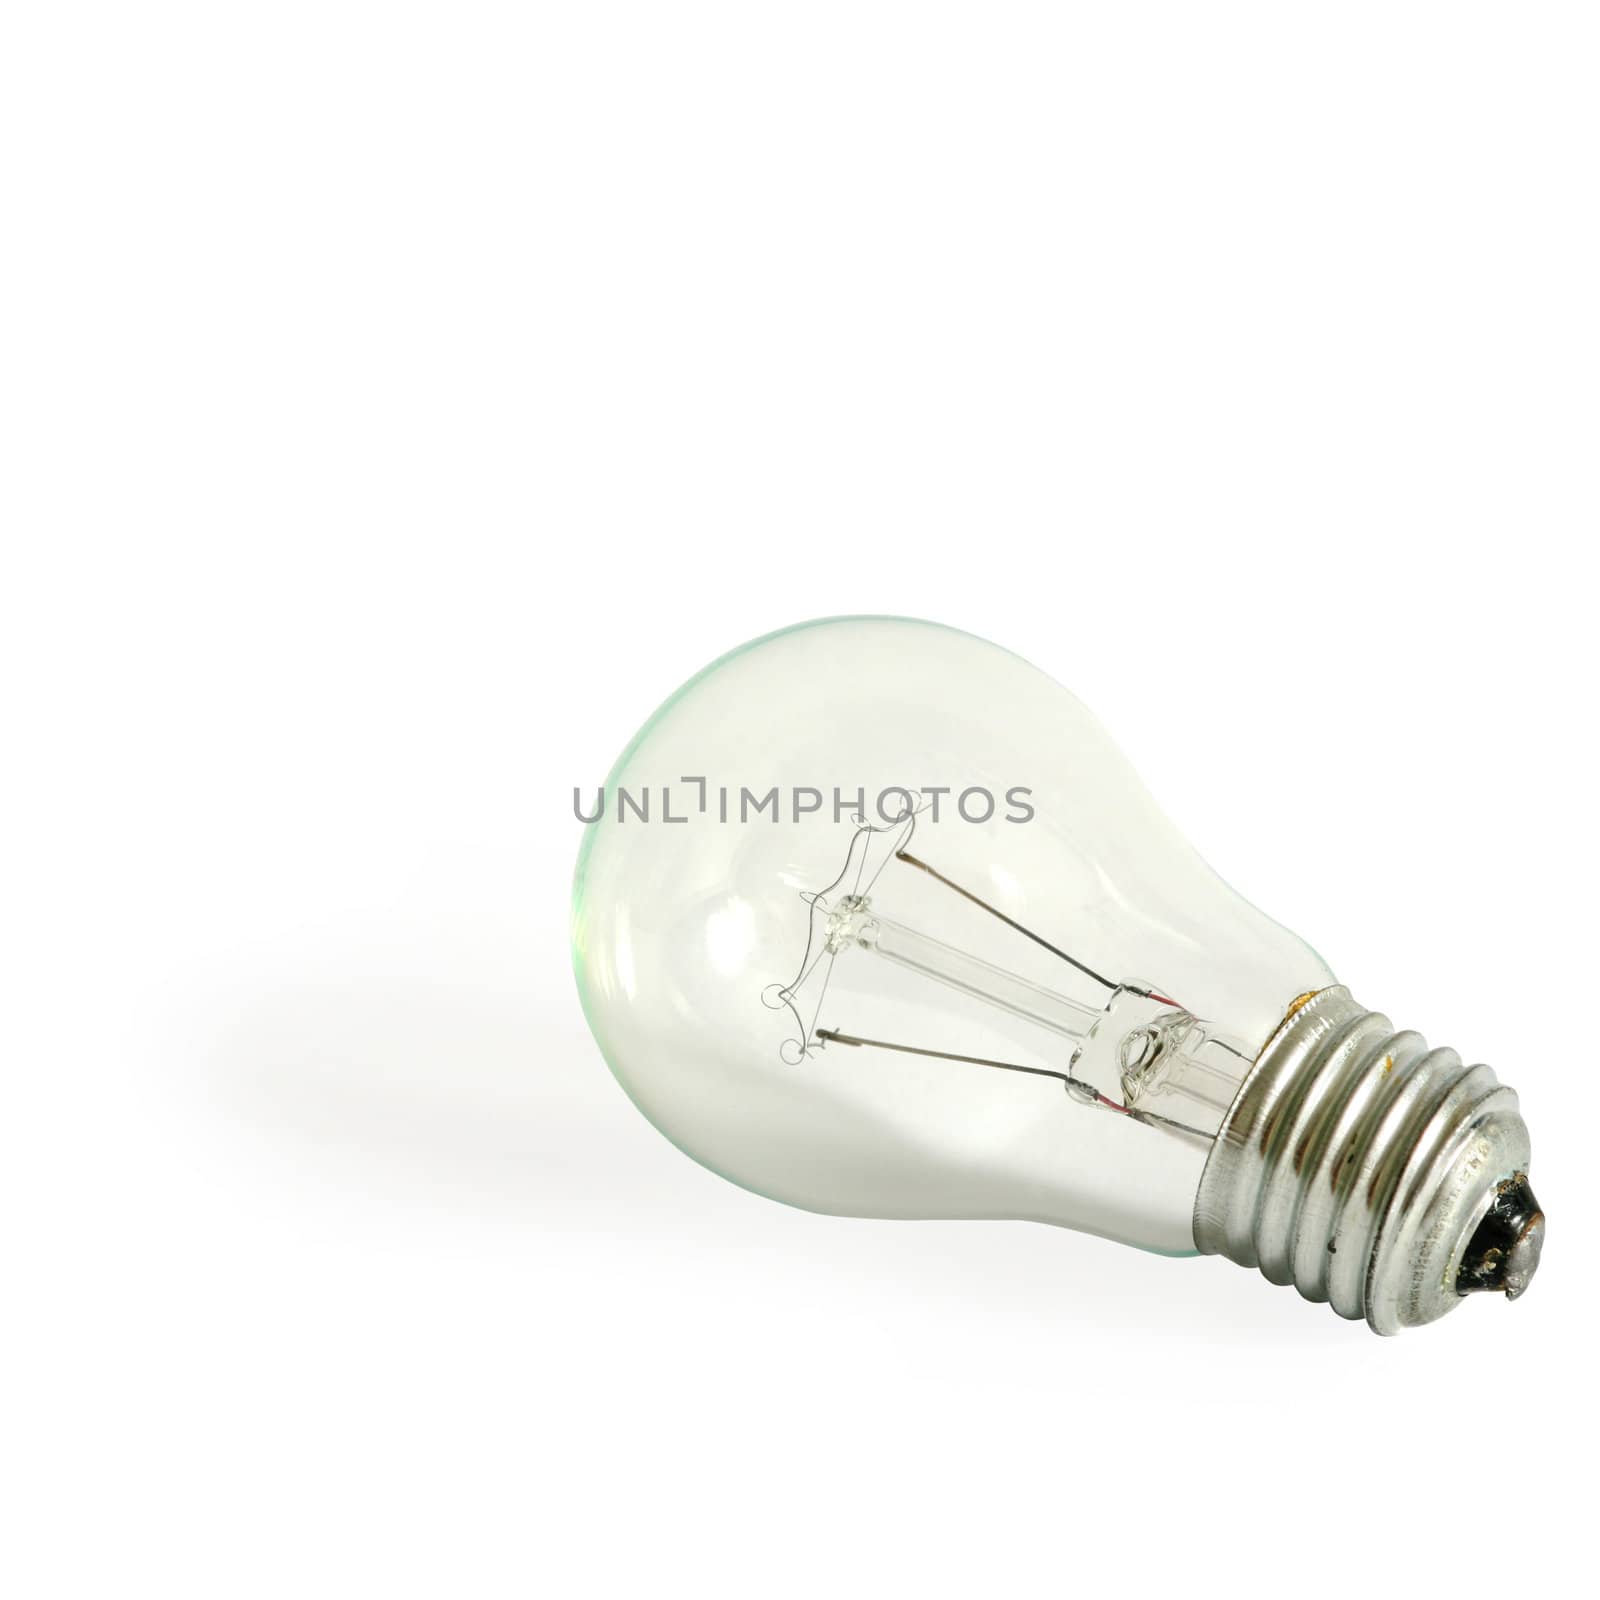 An image of a lightbulb on white background